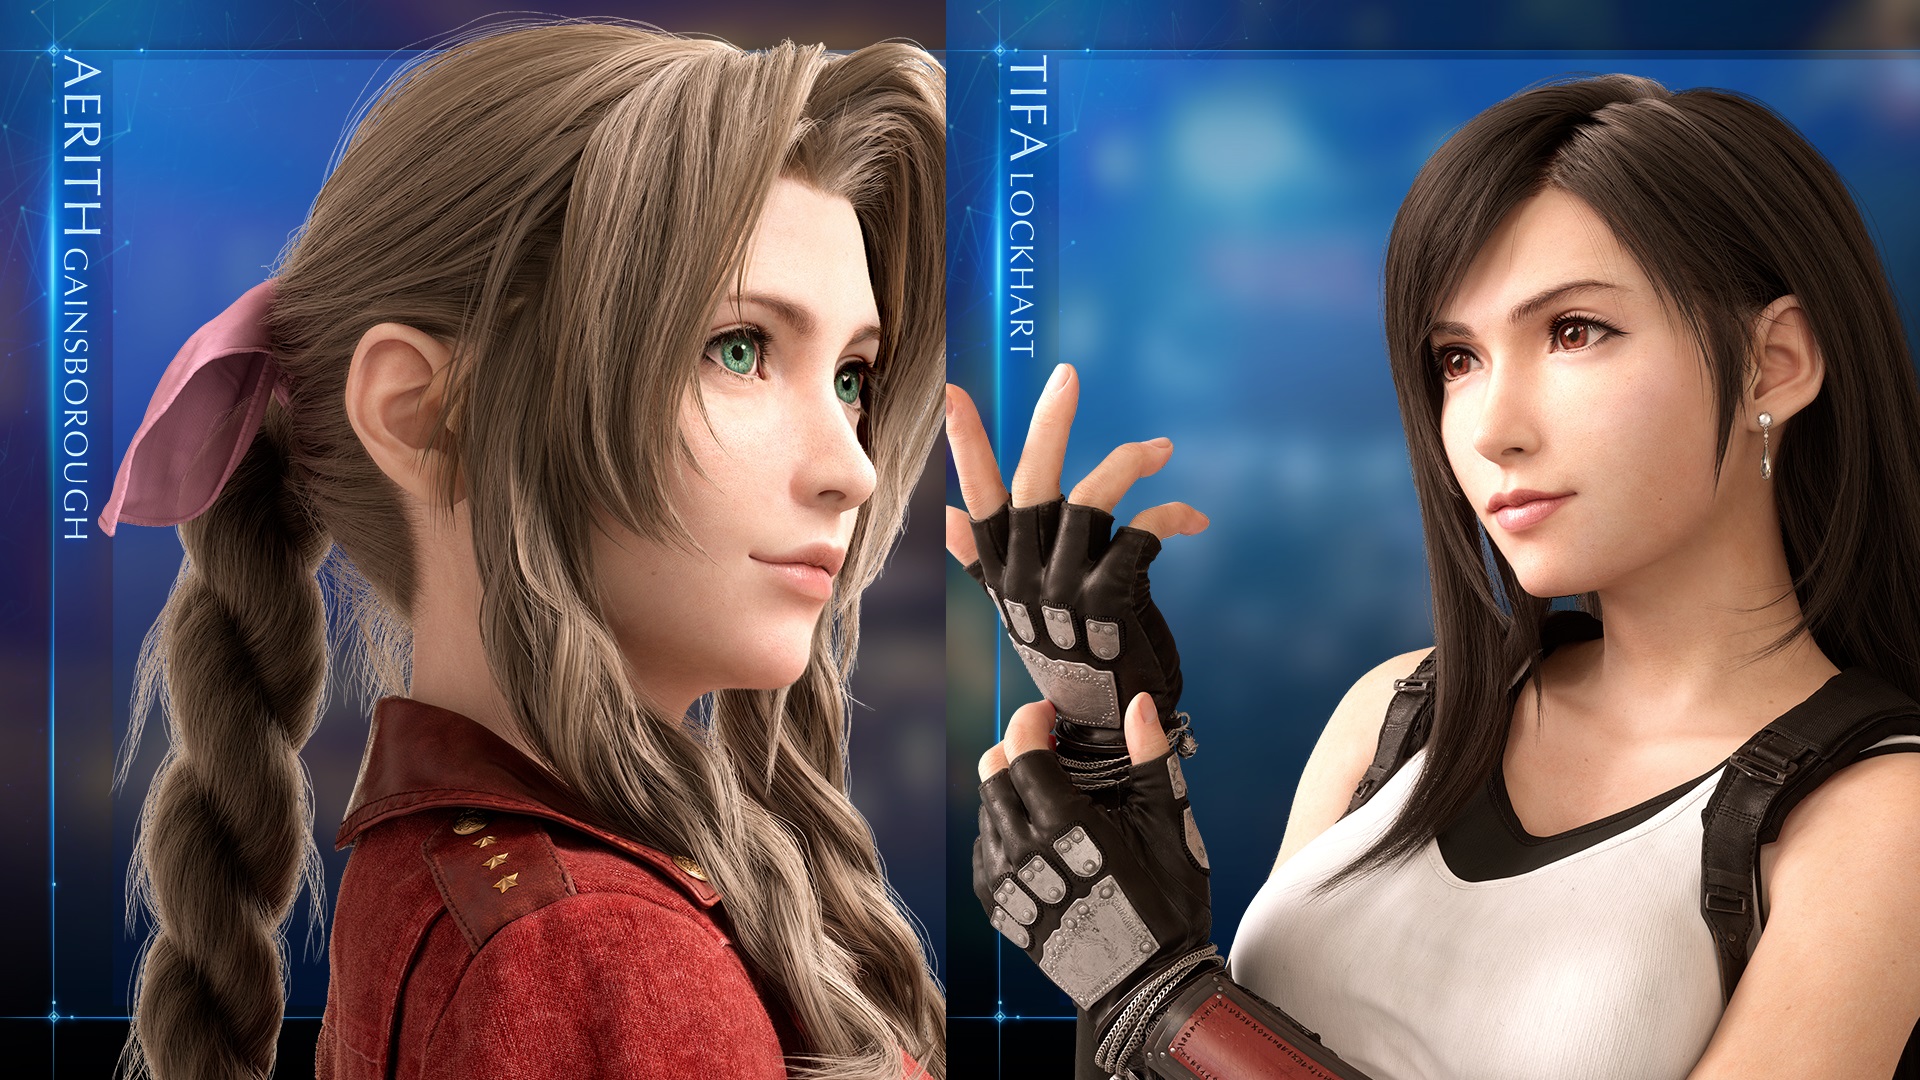 Final Fantasy VII Remake Official Wallpapers of Tifa Lockhart and ...